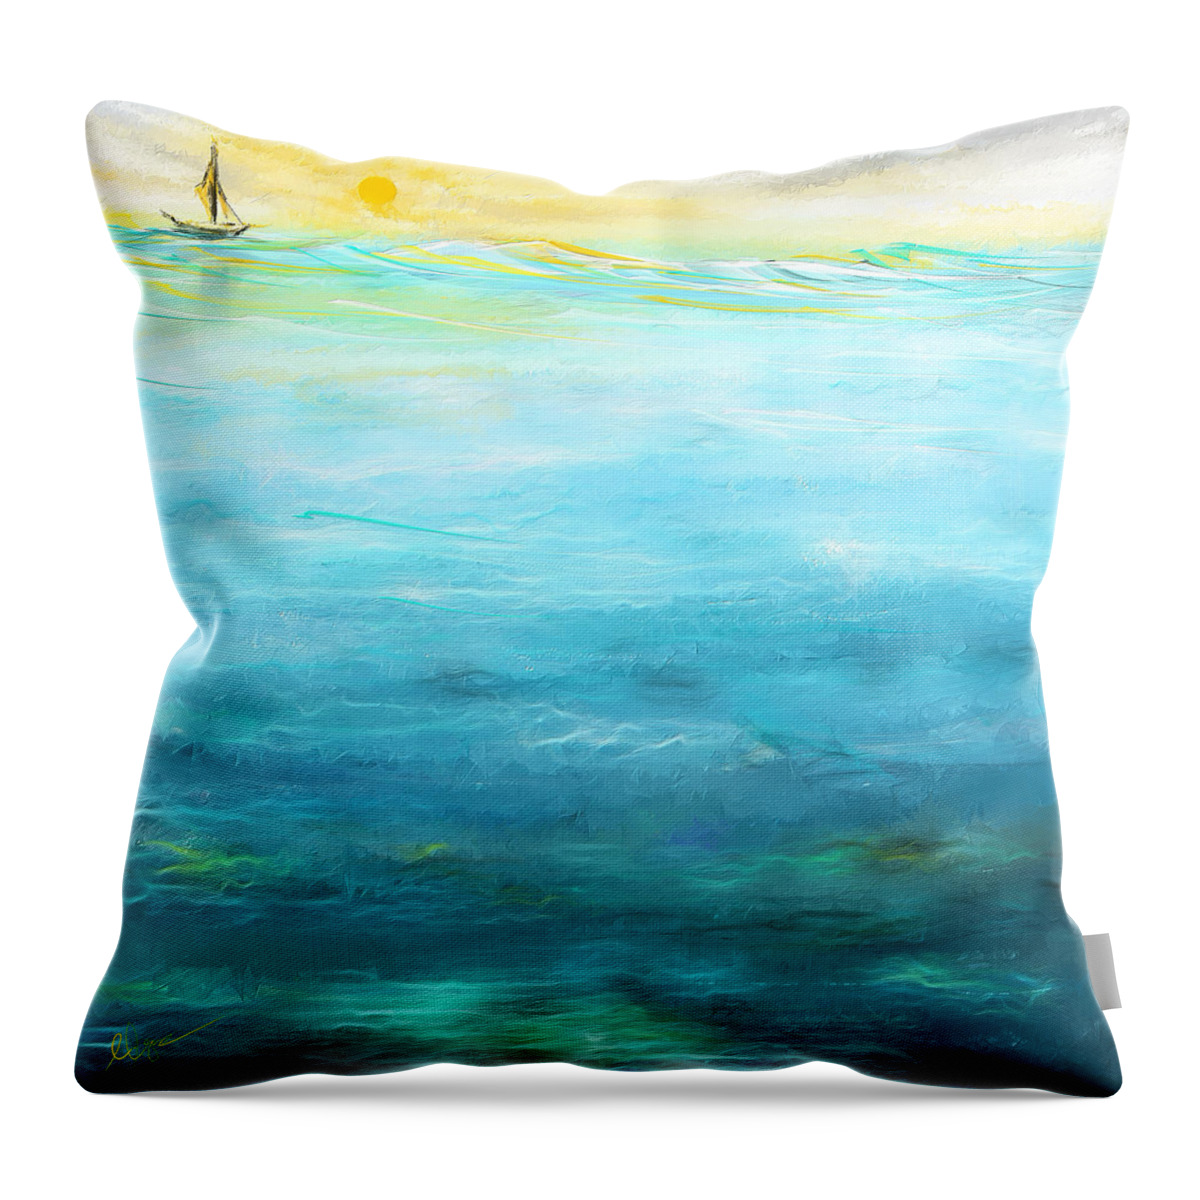 Sailing Throw Pillow featuring the painting Sail Away- Sailing At Sunset Painting by Lourry Legarde